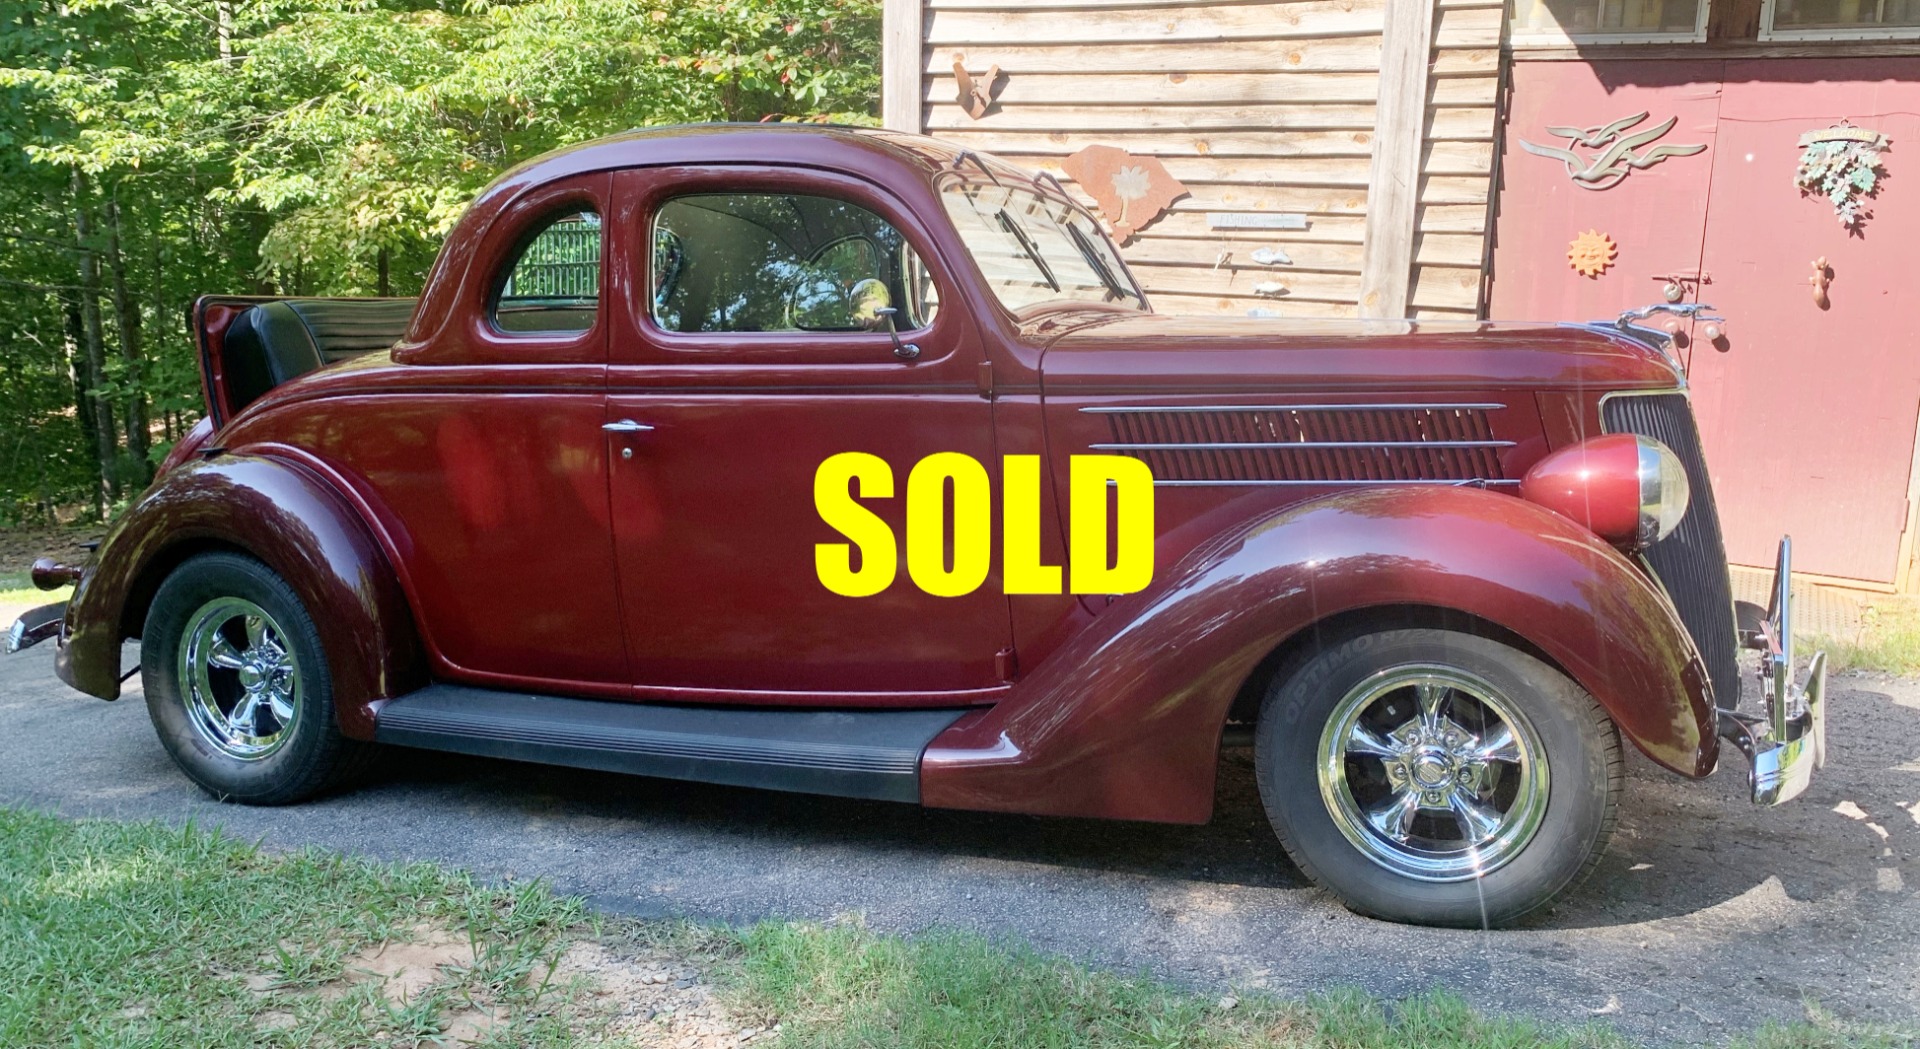 Used 1936 Ford 5-Window Rumble Seat Coupe  217 , For Sale $41500, Call Us: (704) 996-3735